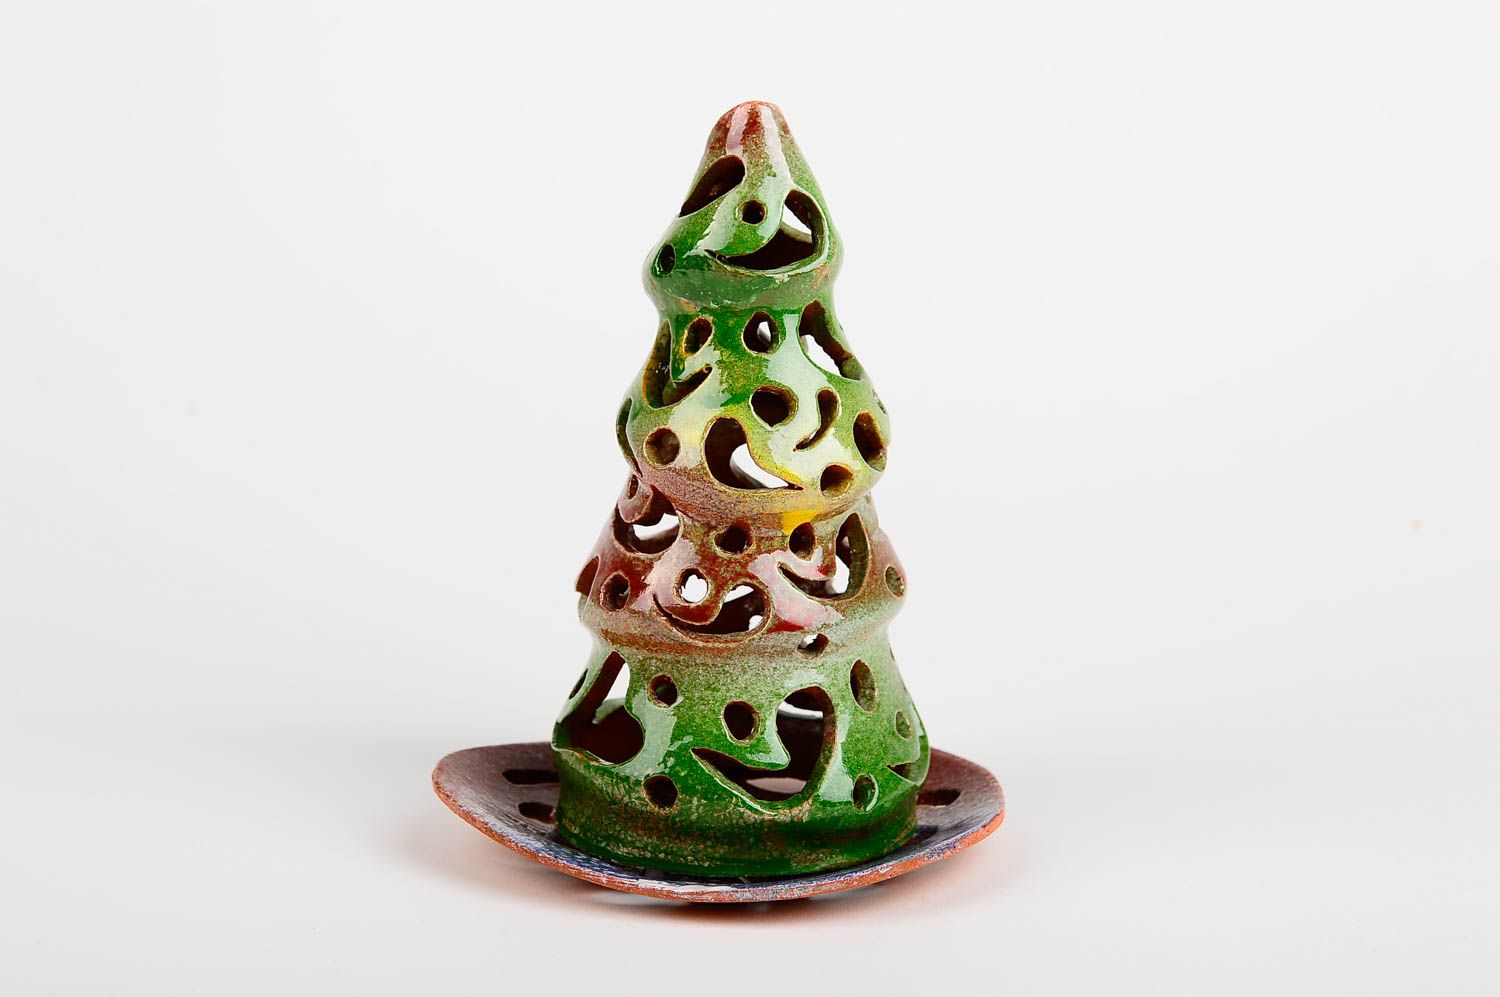 Ceramic candle holder for tea light in the shape of Christmas tree 6,3 inches, 0,44 lb photo 1